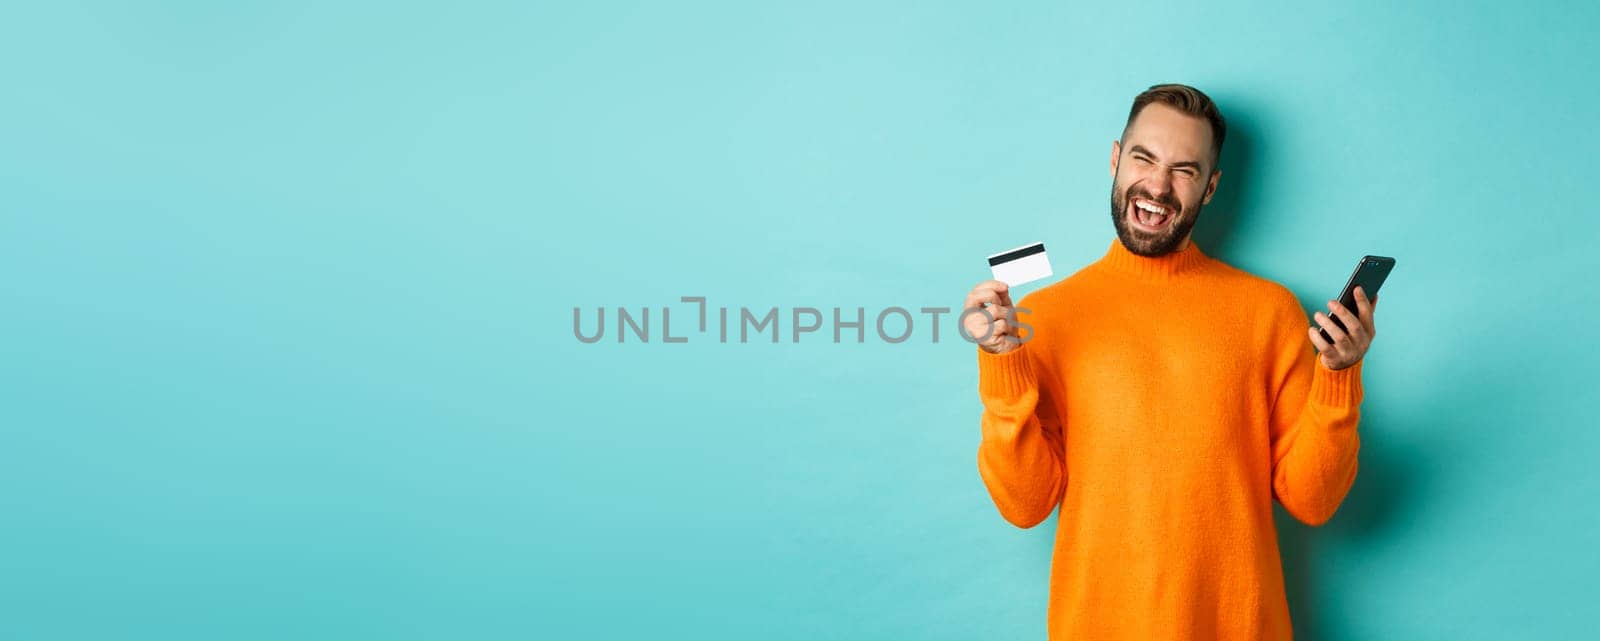 Online shopping. Happy young man using mobile phone and credit card, paying internet, light blue background.